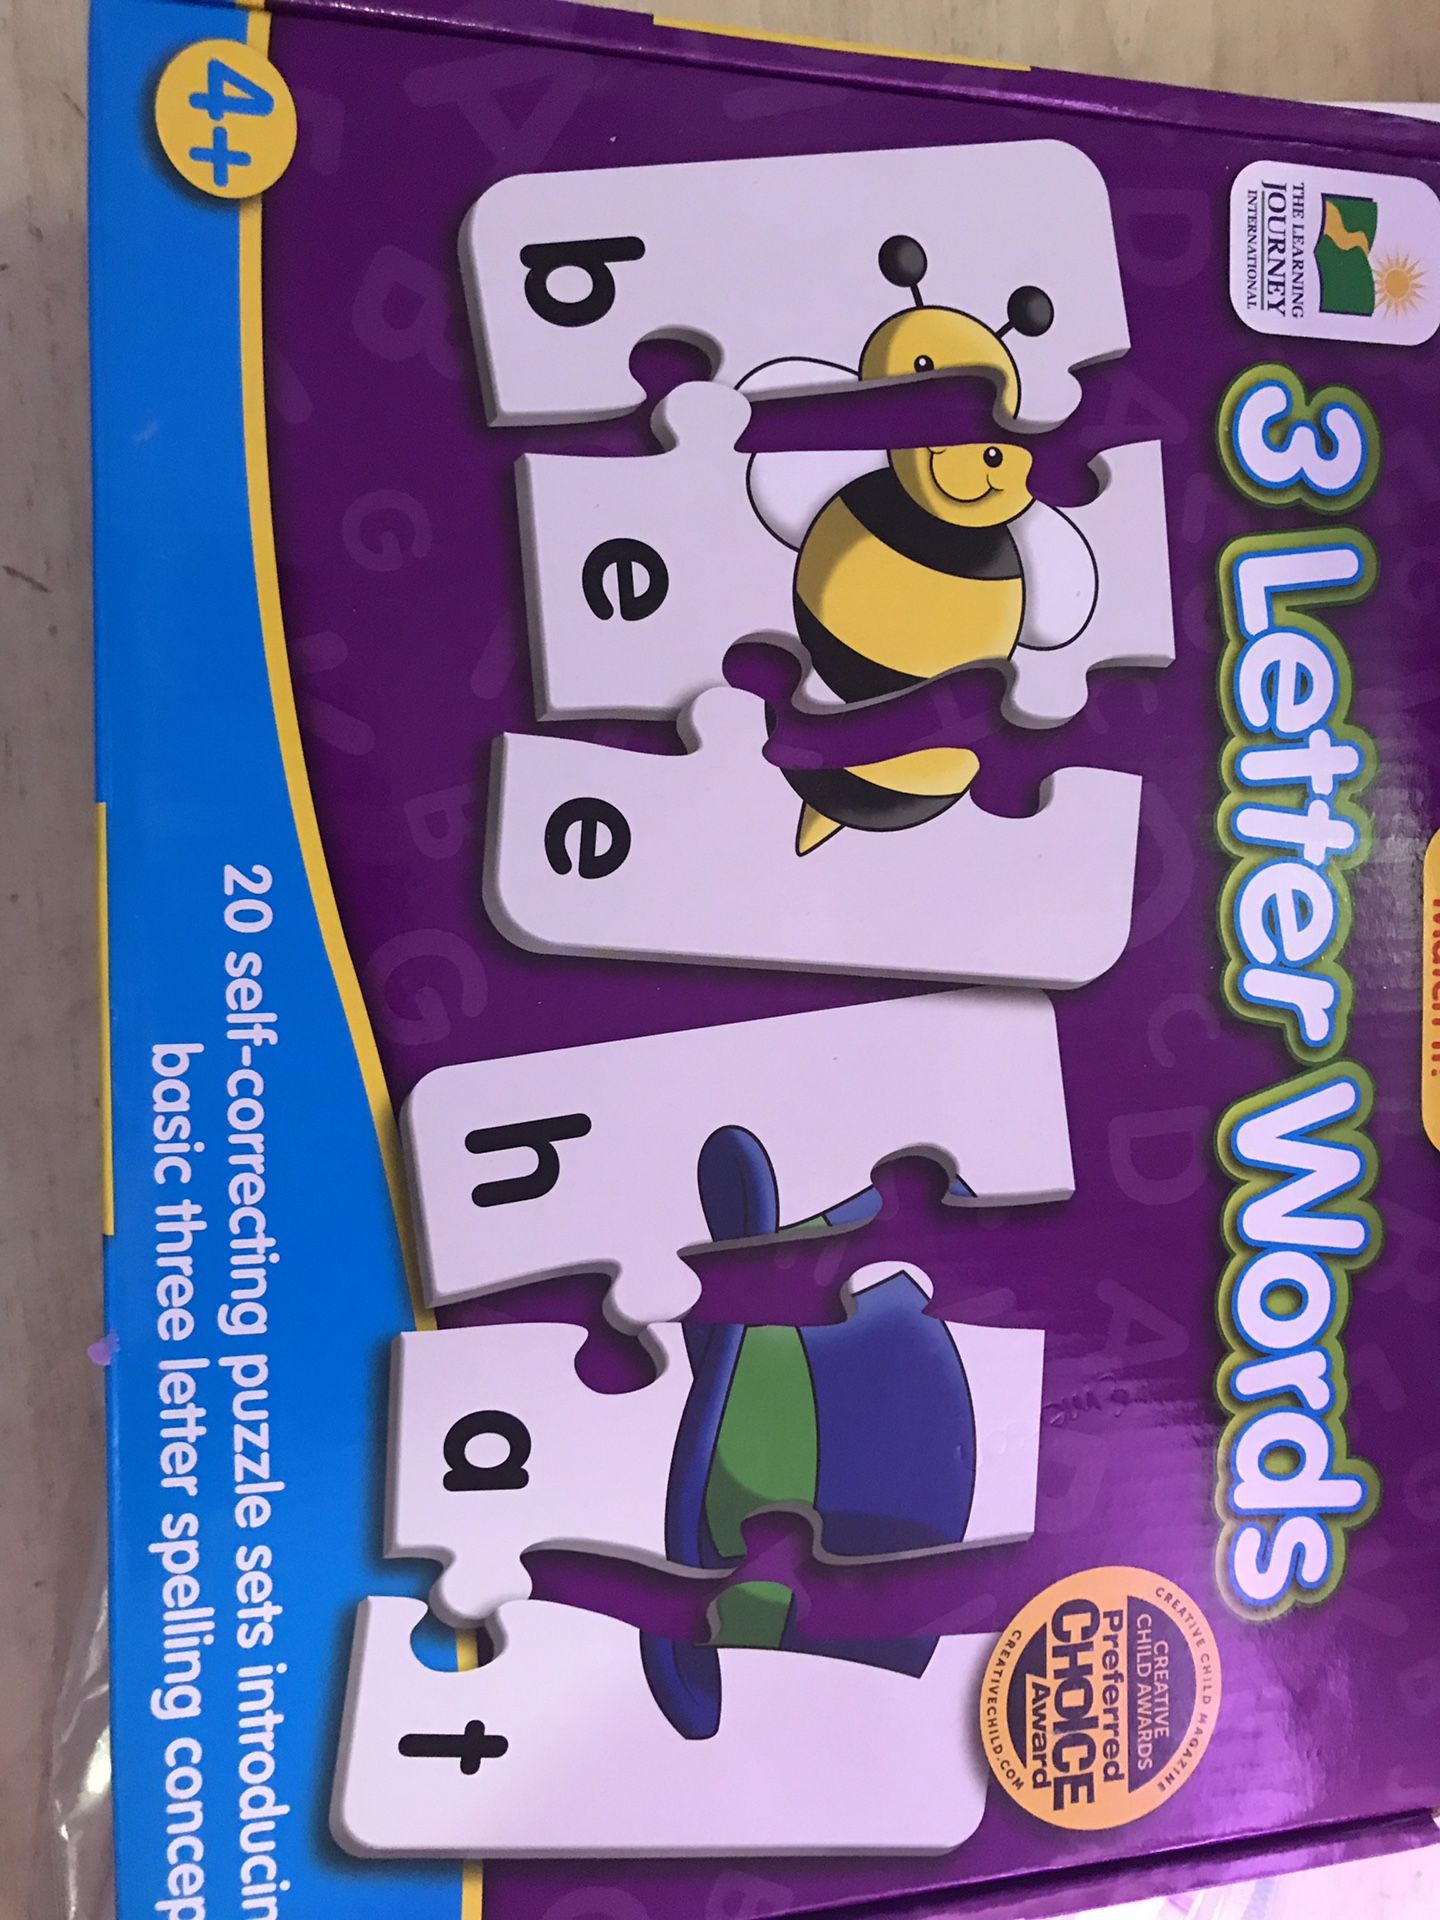 Kids games and puzzles